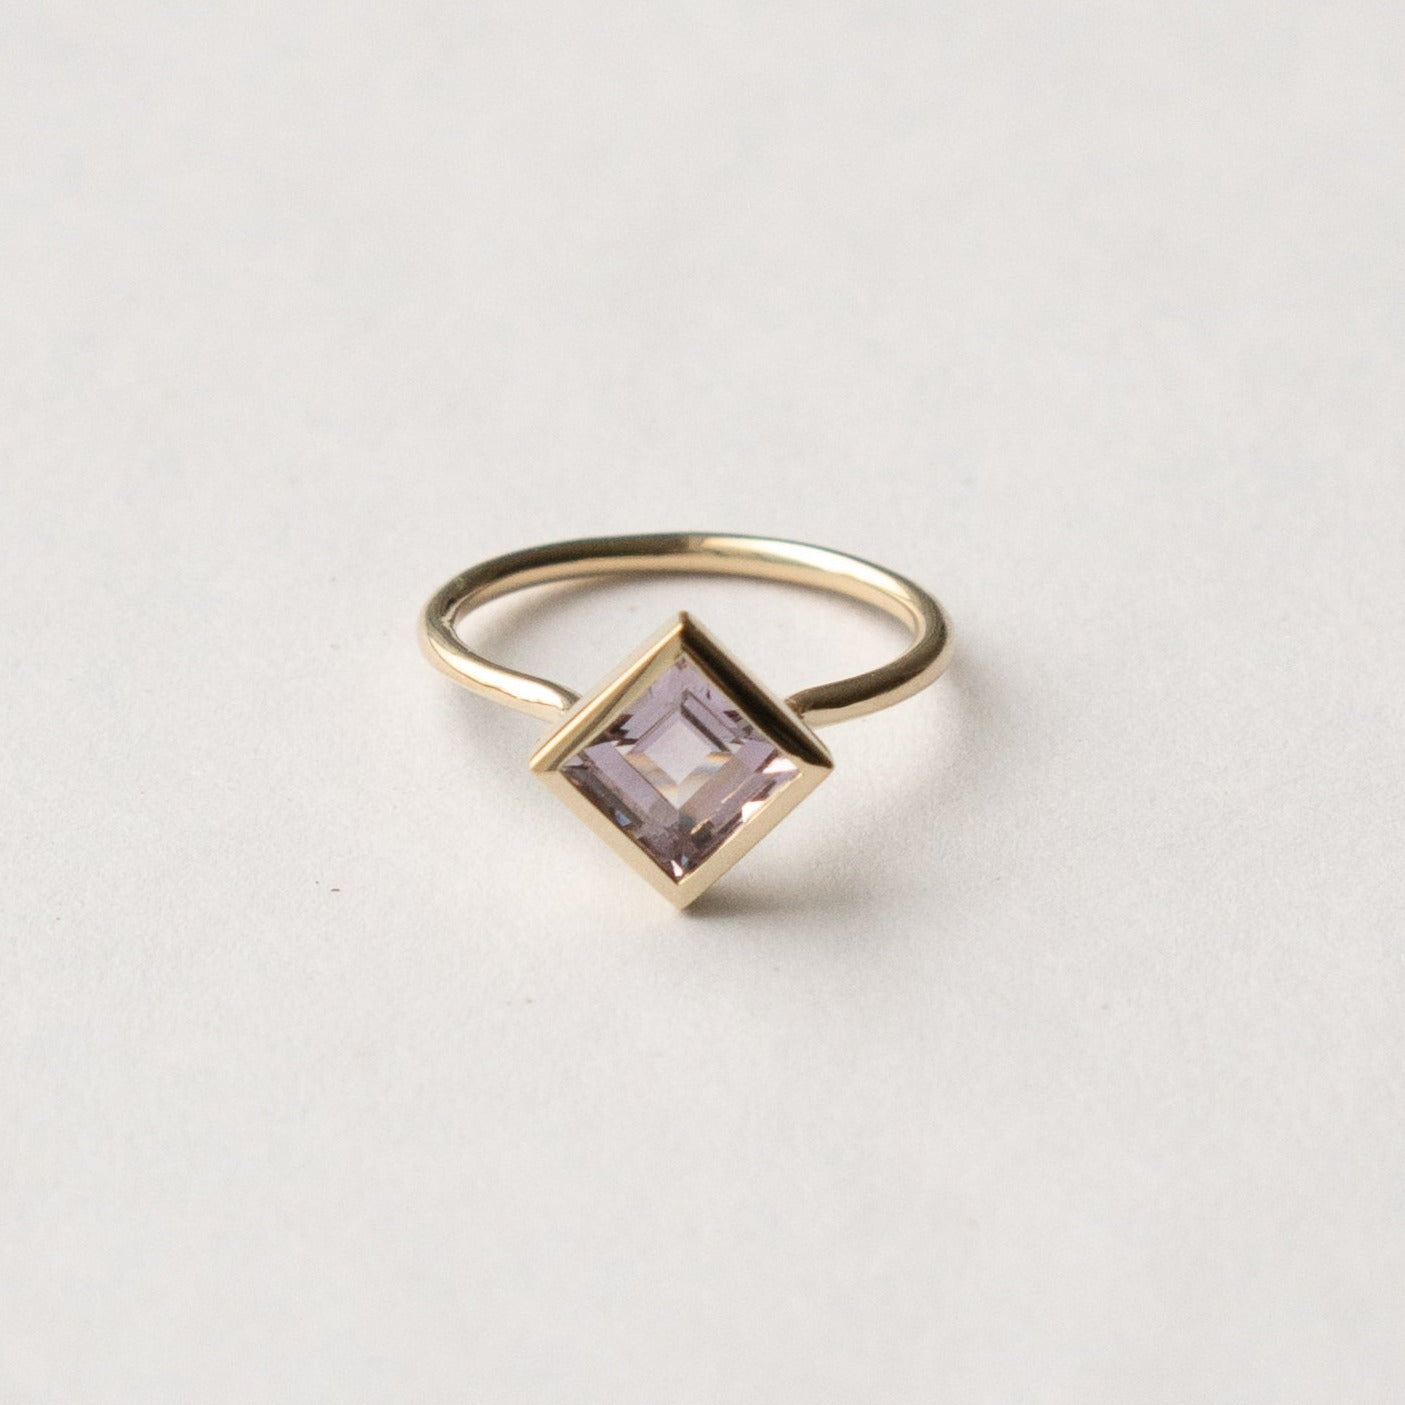 Unique Tisa Ring with sustainable square amethyst in 14k yellow gold by SHW Fine Jewelry made in NYC